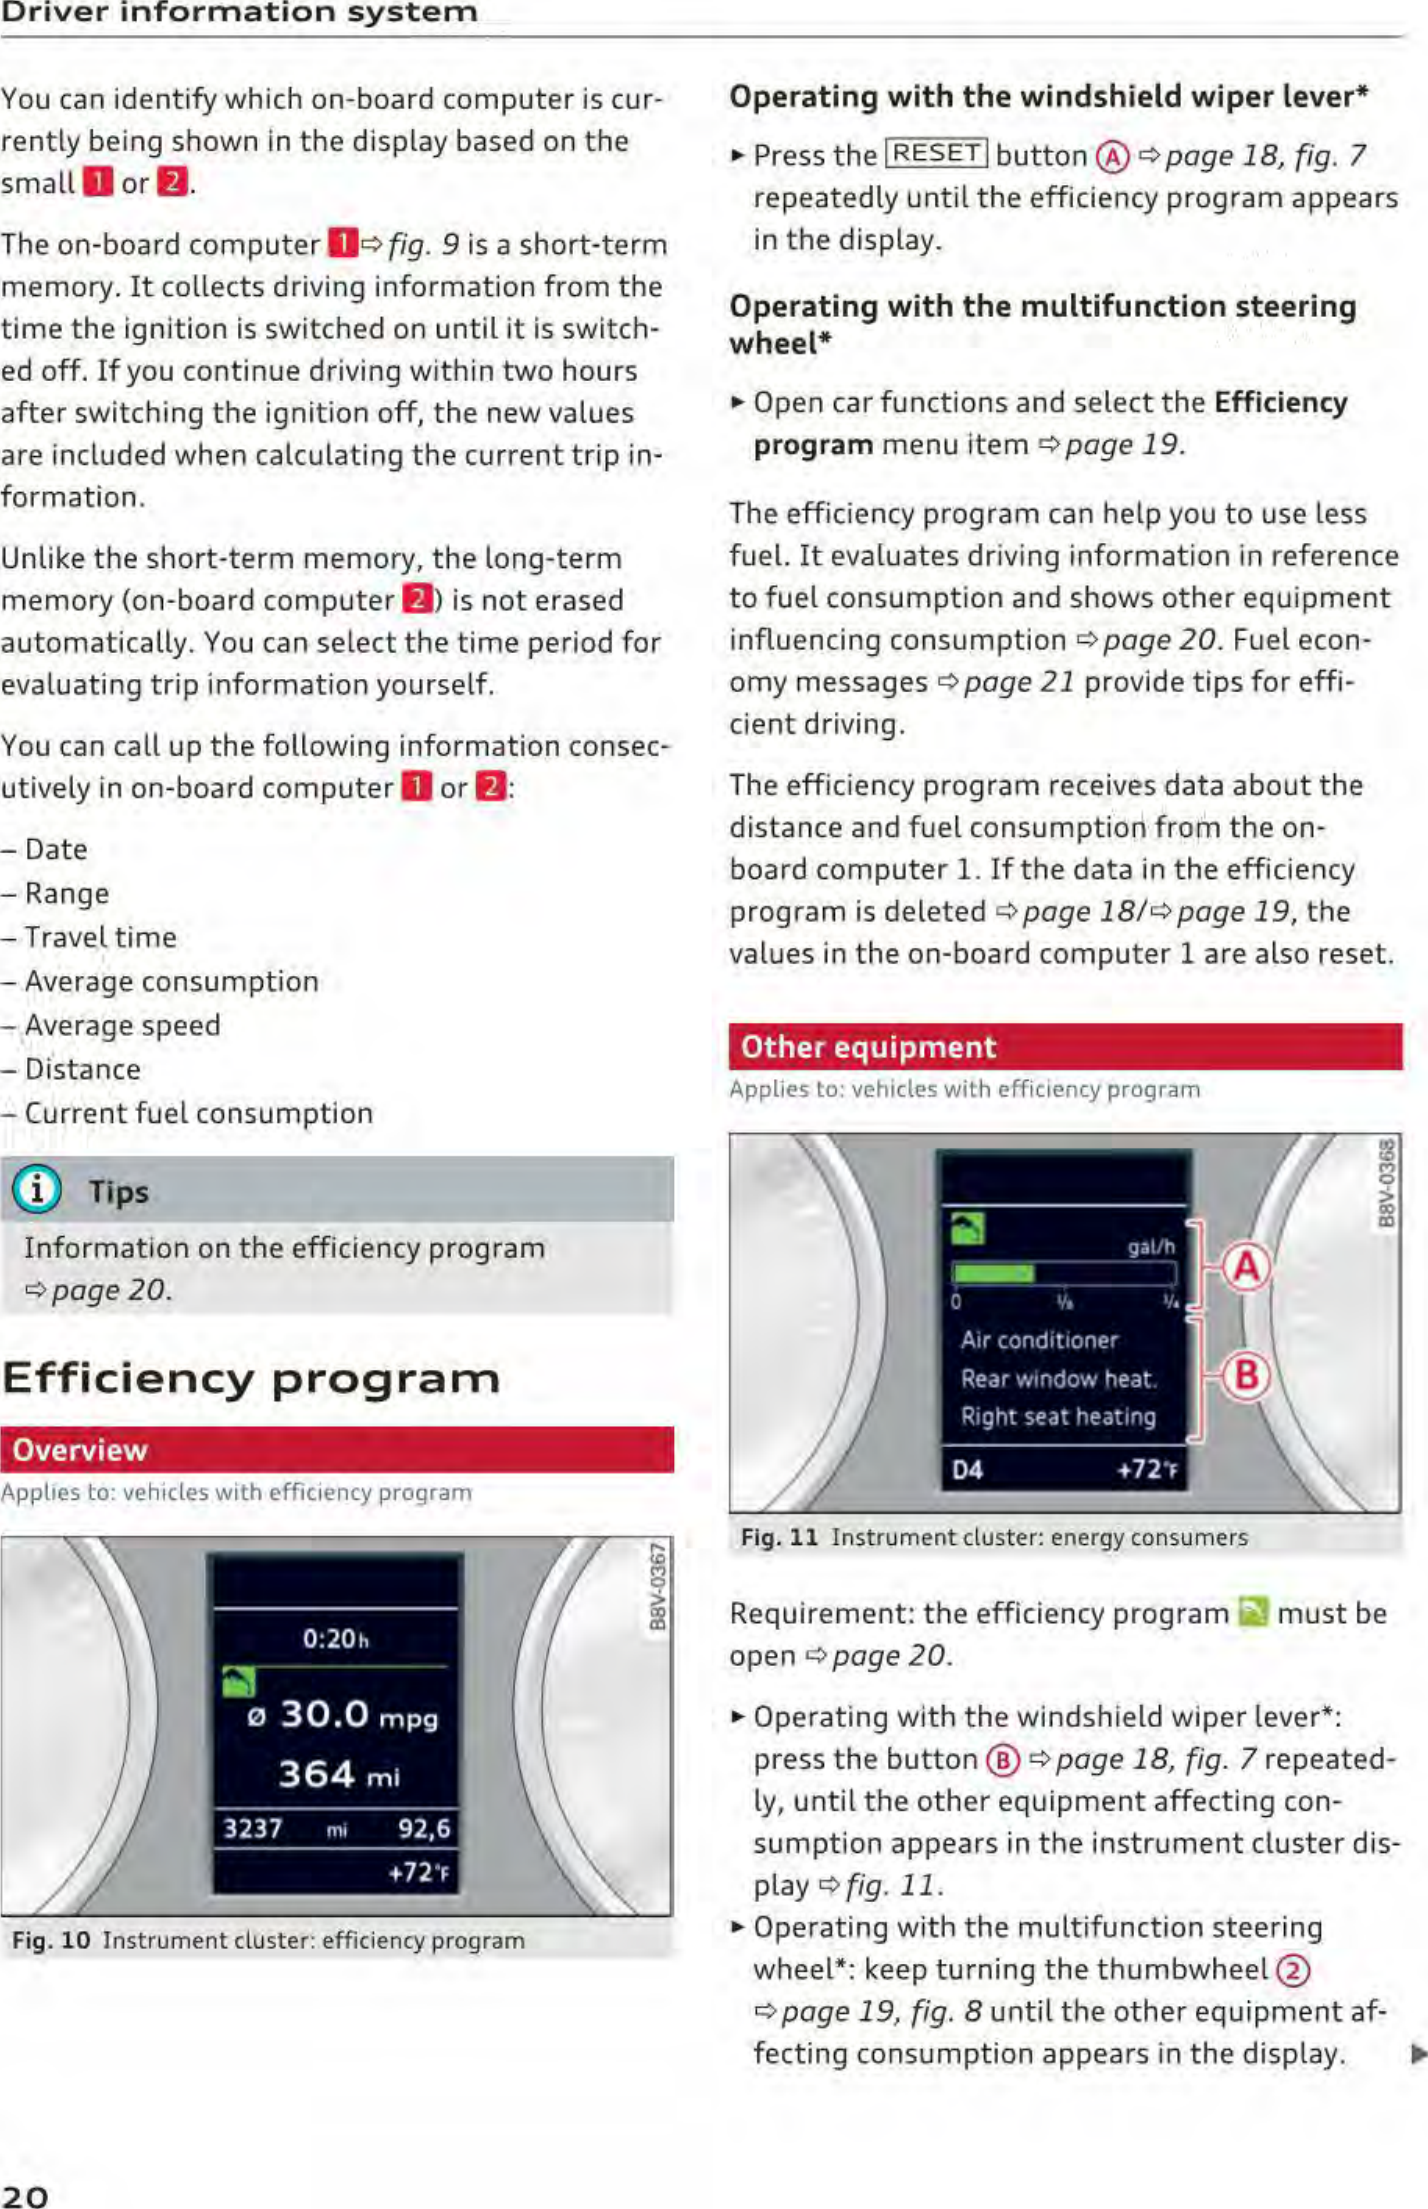 Page 22 of Robert Bosch Car Multimedia AUFPK20 Instrument cluster with immobilizer User Manual part 1